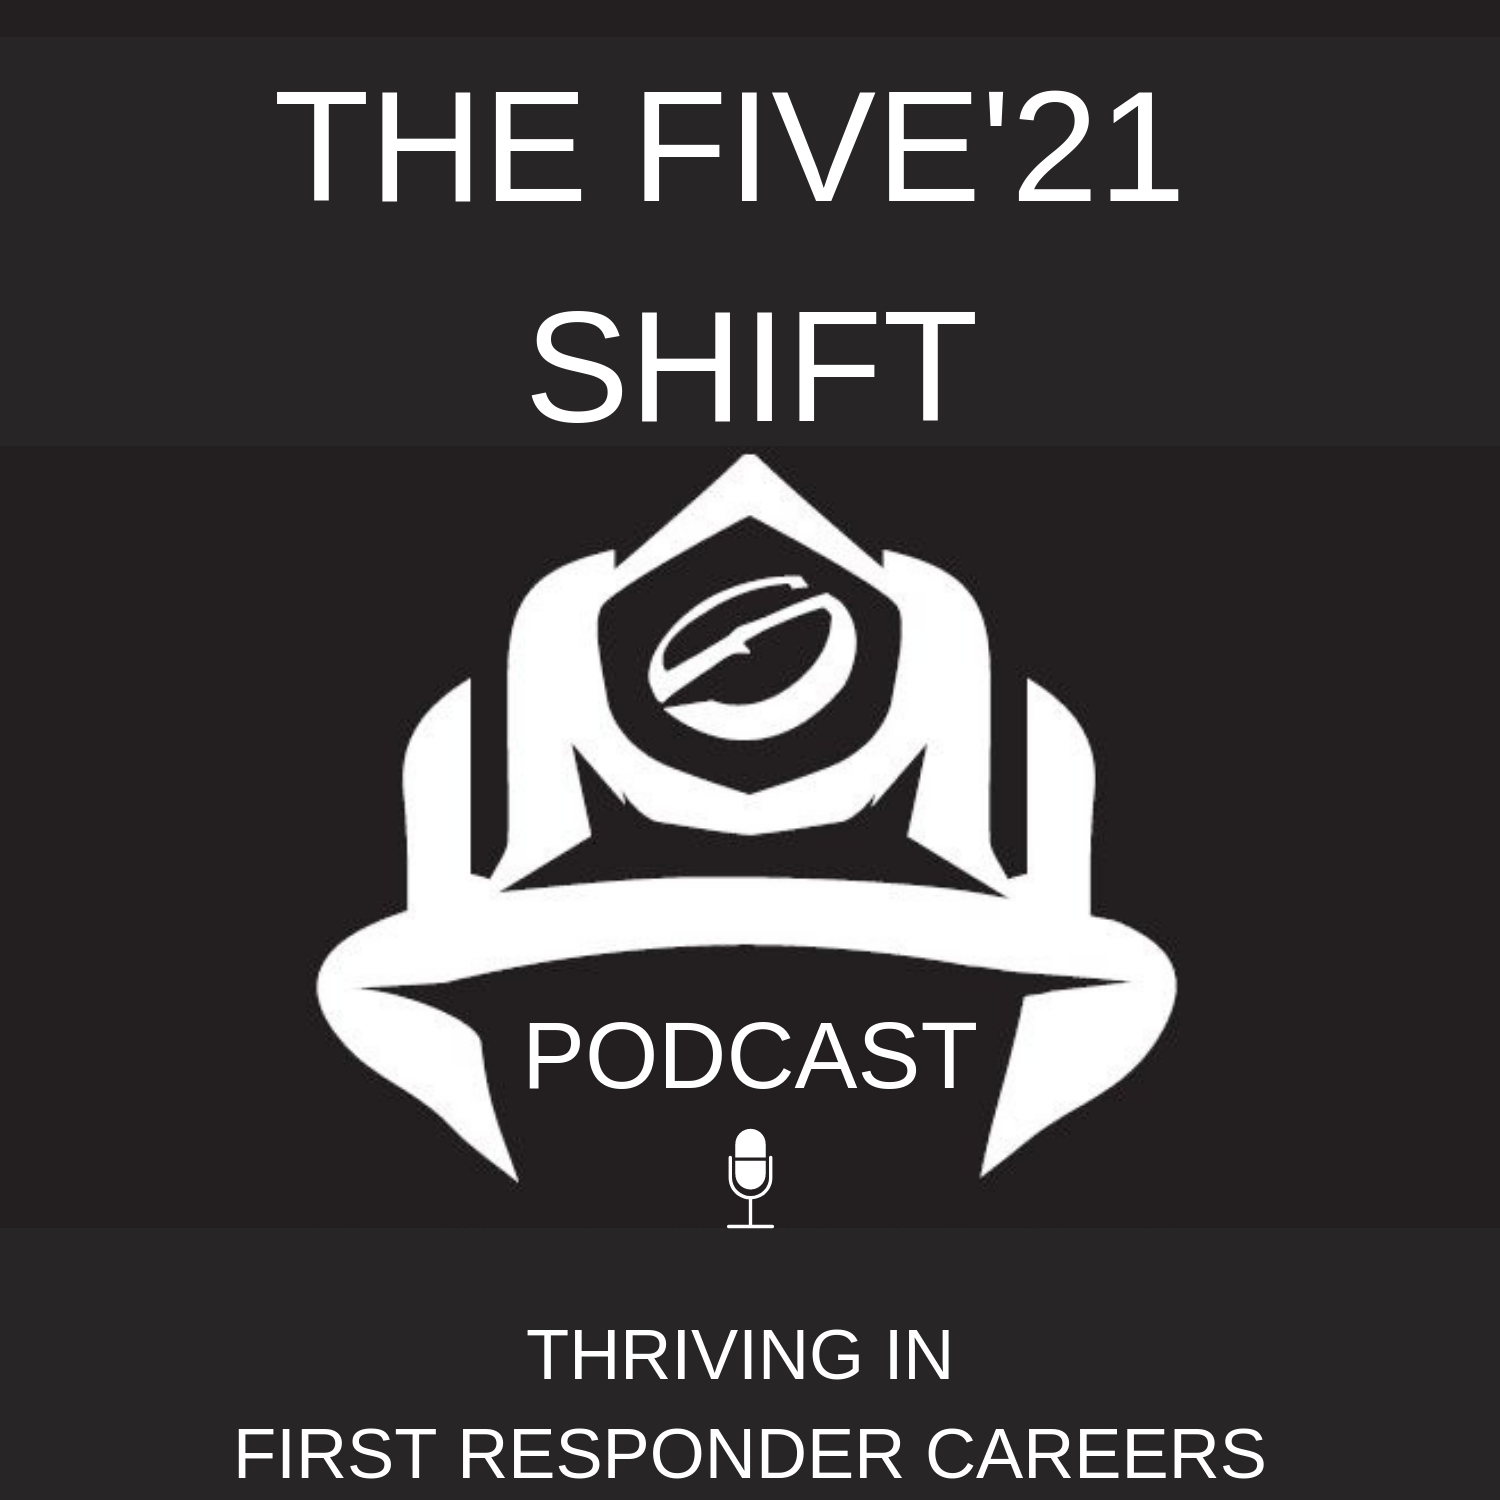 A Podcast for People who want to Thrive instead of Survive. Inspiration, Personal Development, Mental Resilience and Vitality. The Five'21 Shift Podcast